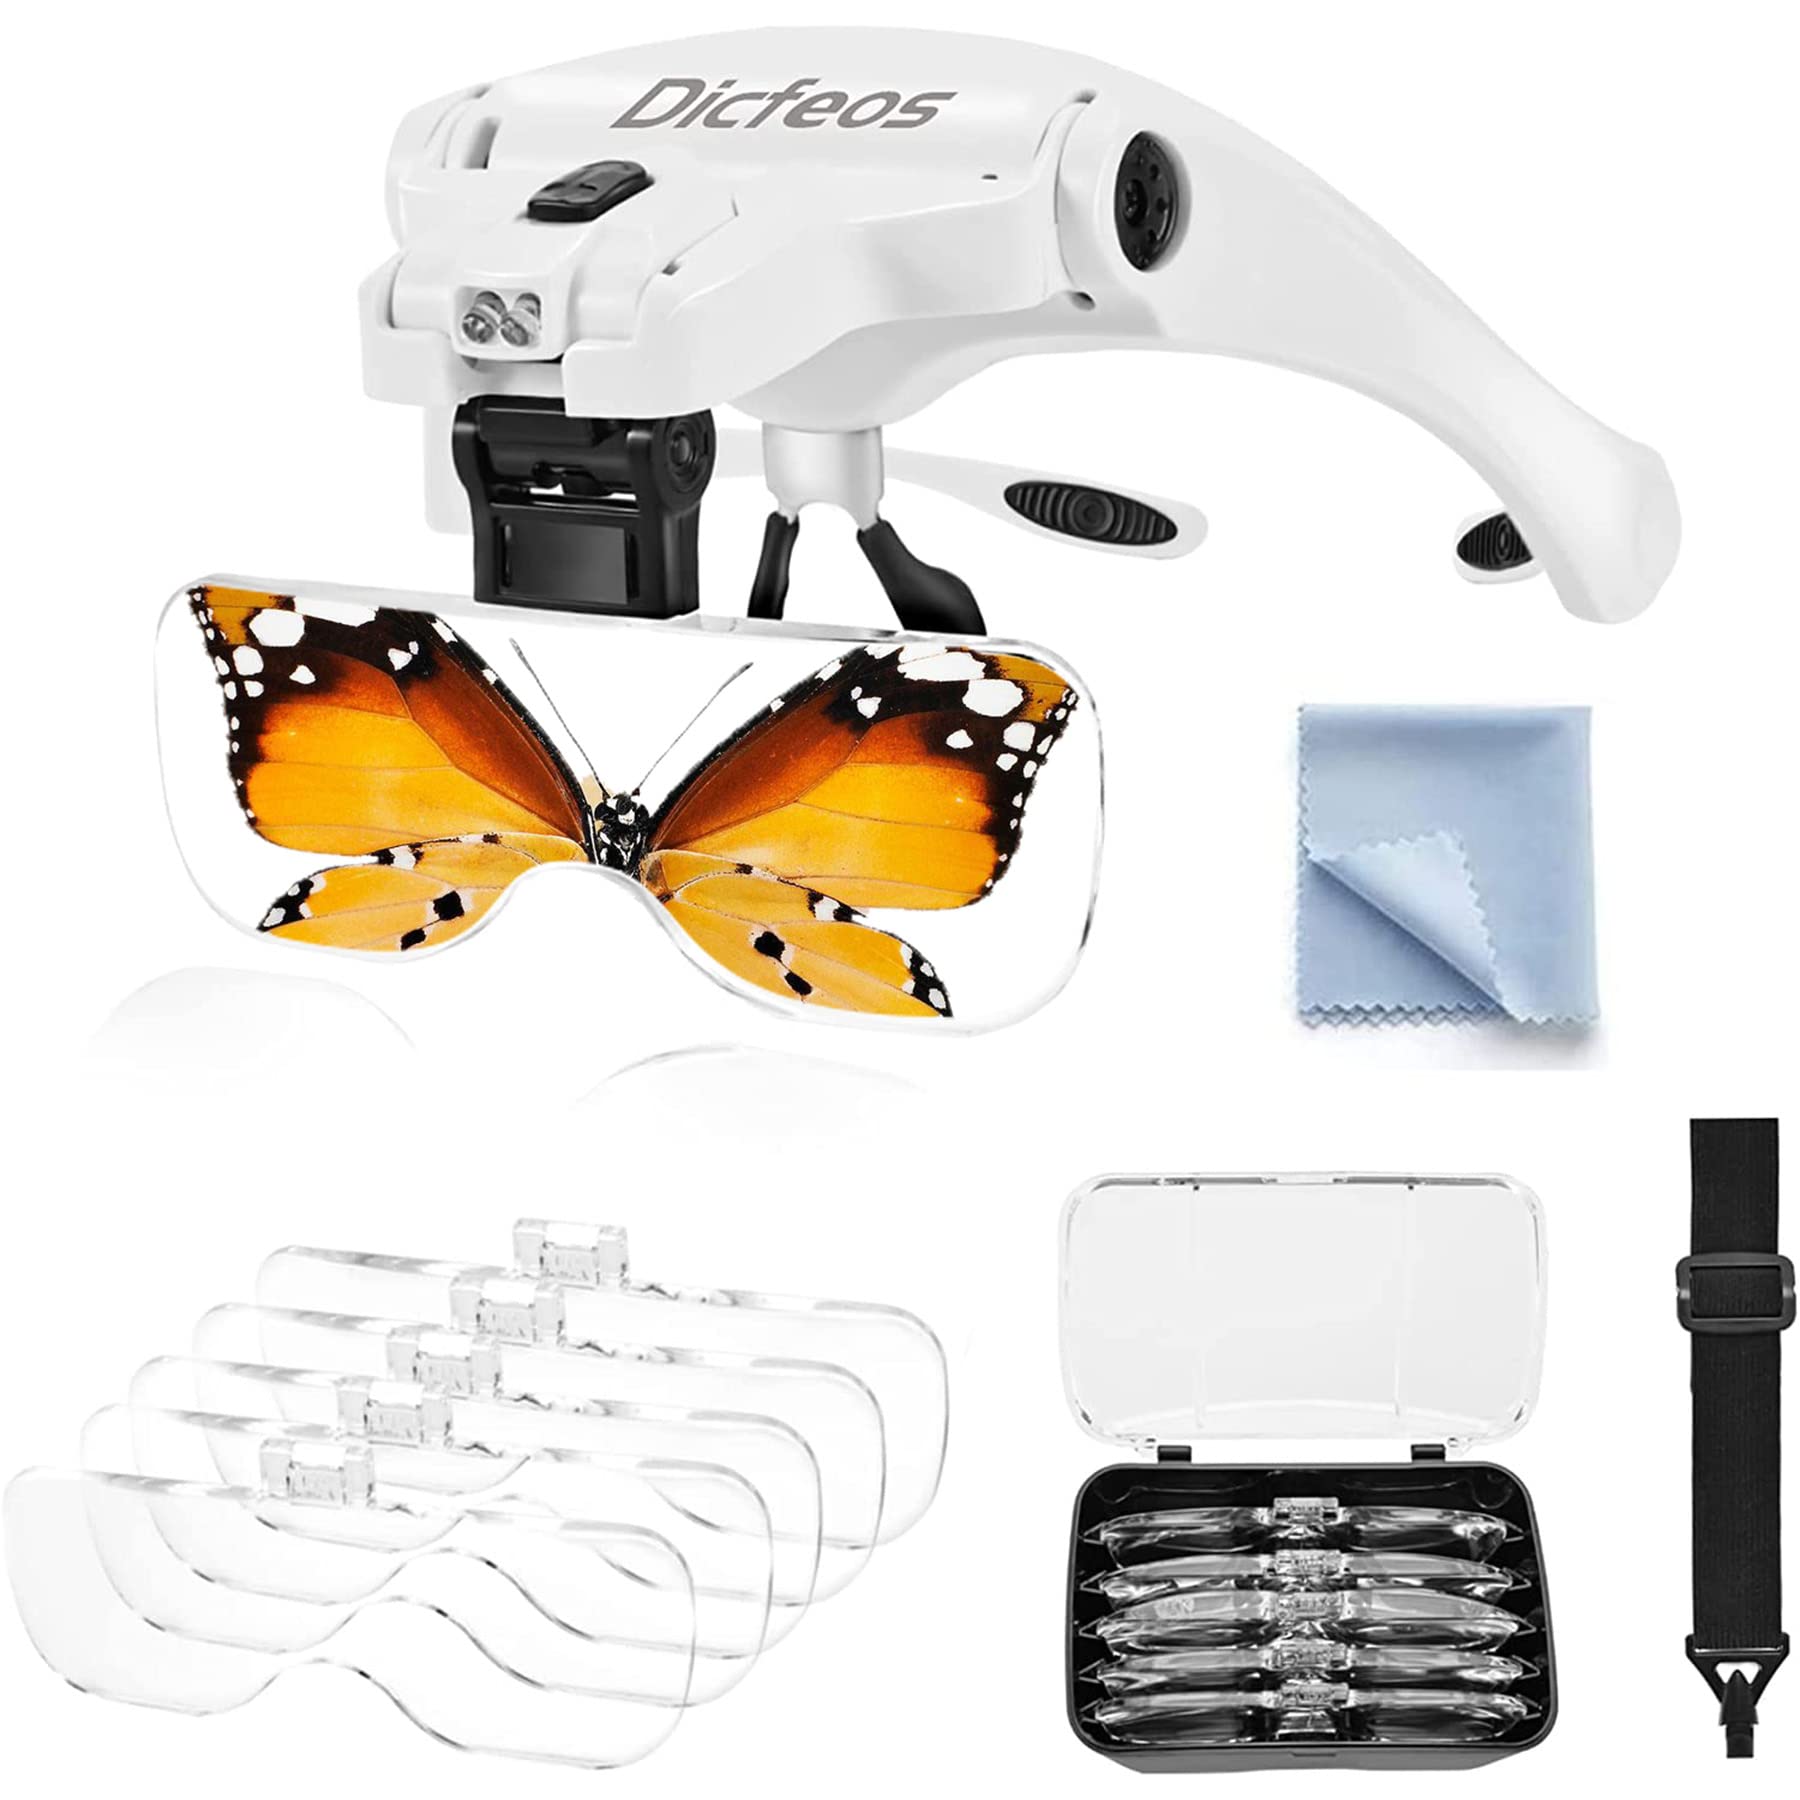 VISION AID Magnifying Glasses with LED Light, Headband, 5 Lenses